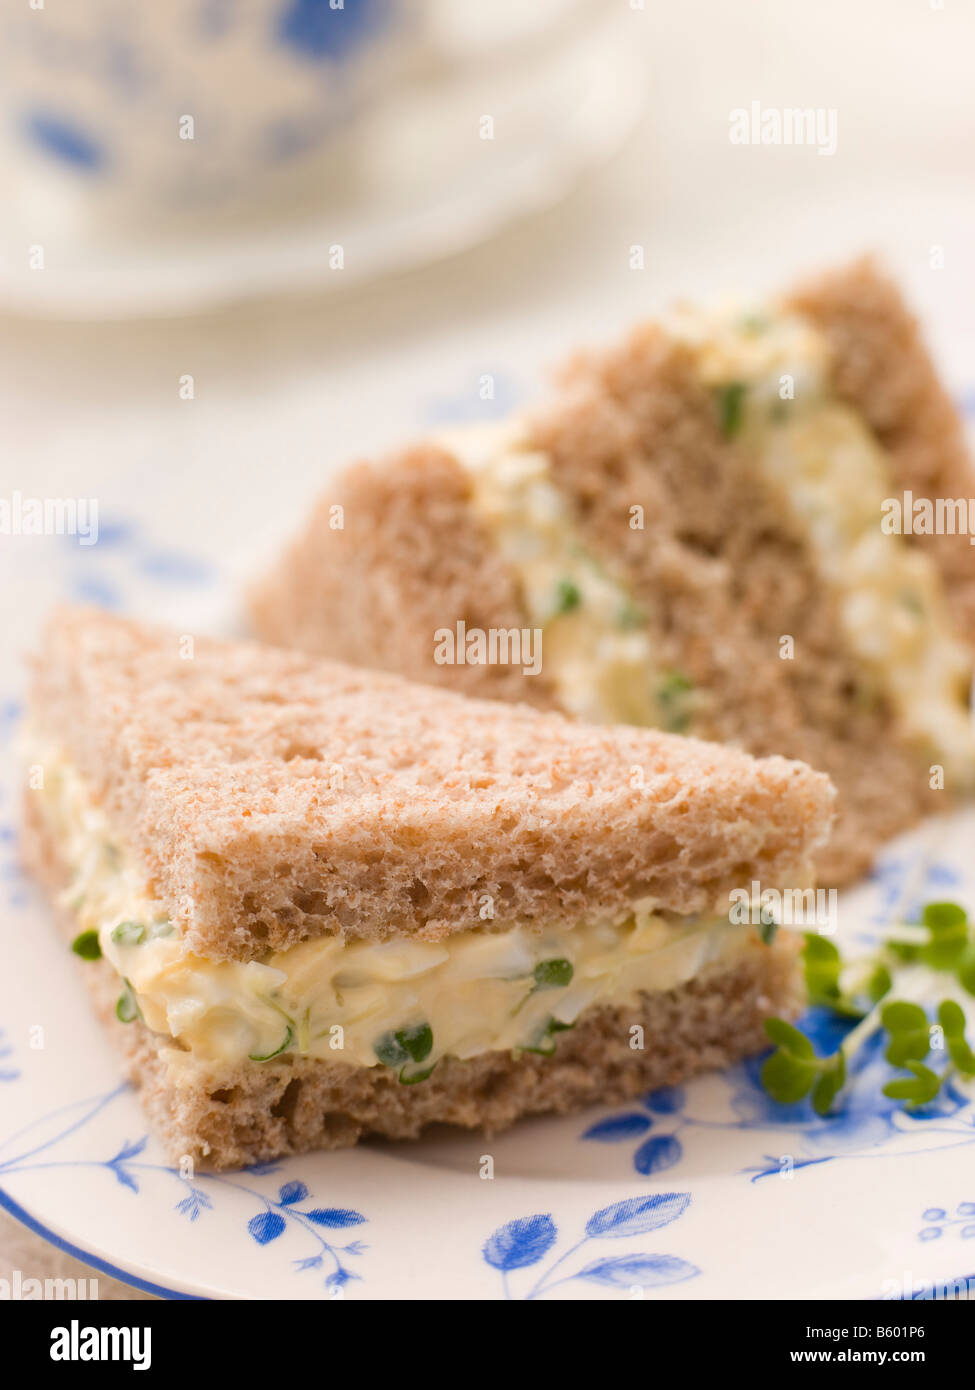 Egg and Cress Sandwich on Brown Bread with Afternoon Tea Stock Photo